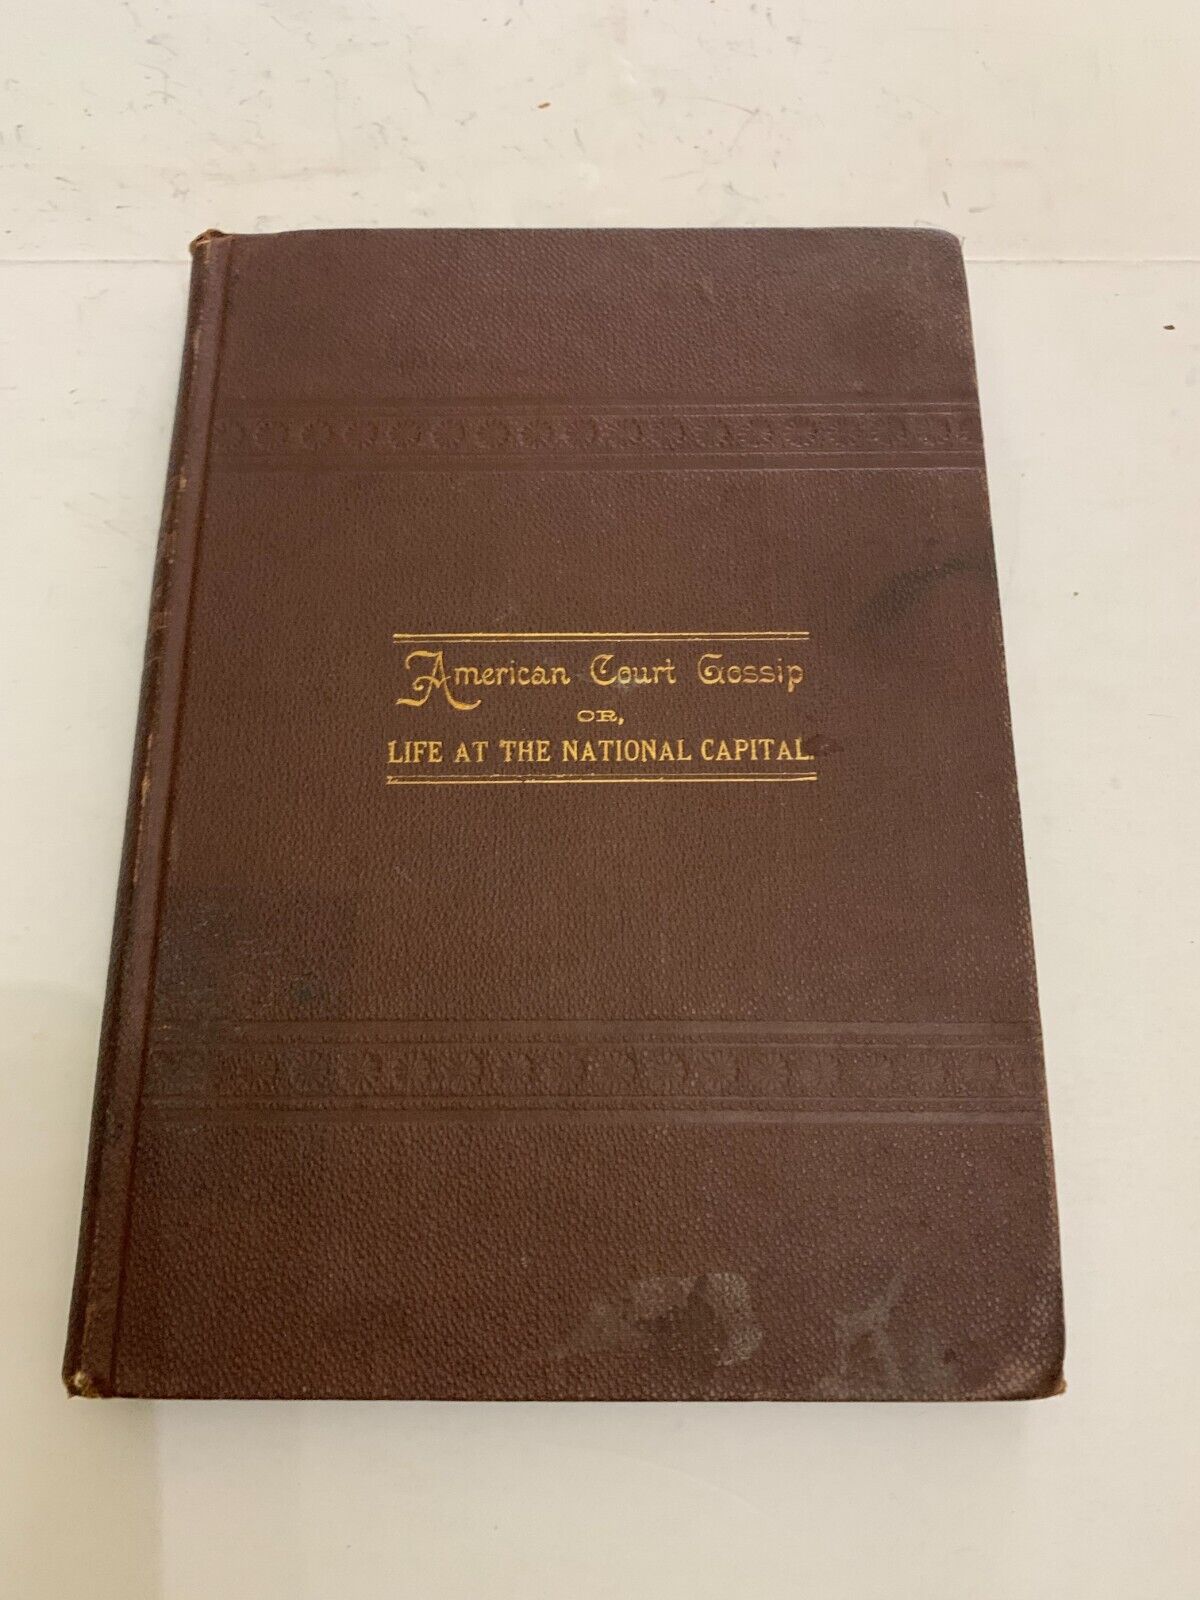 1887 American Court Gossip or Life At The National Capitol by Mrs. E.N. Chapin